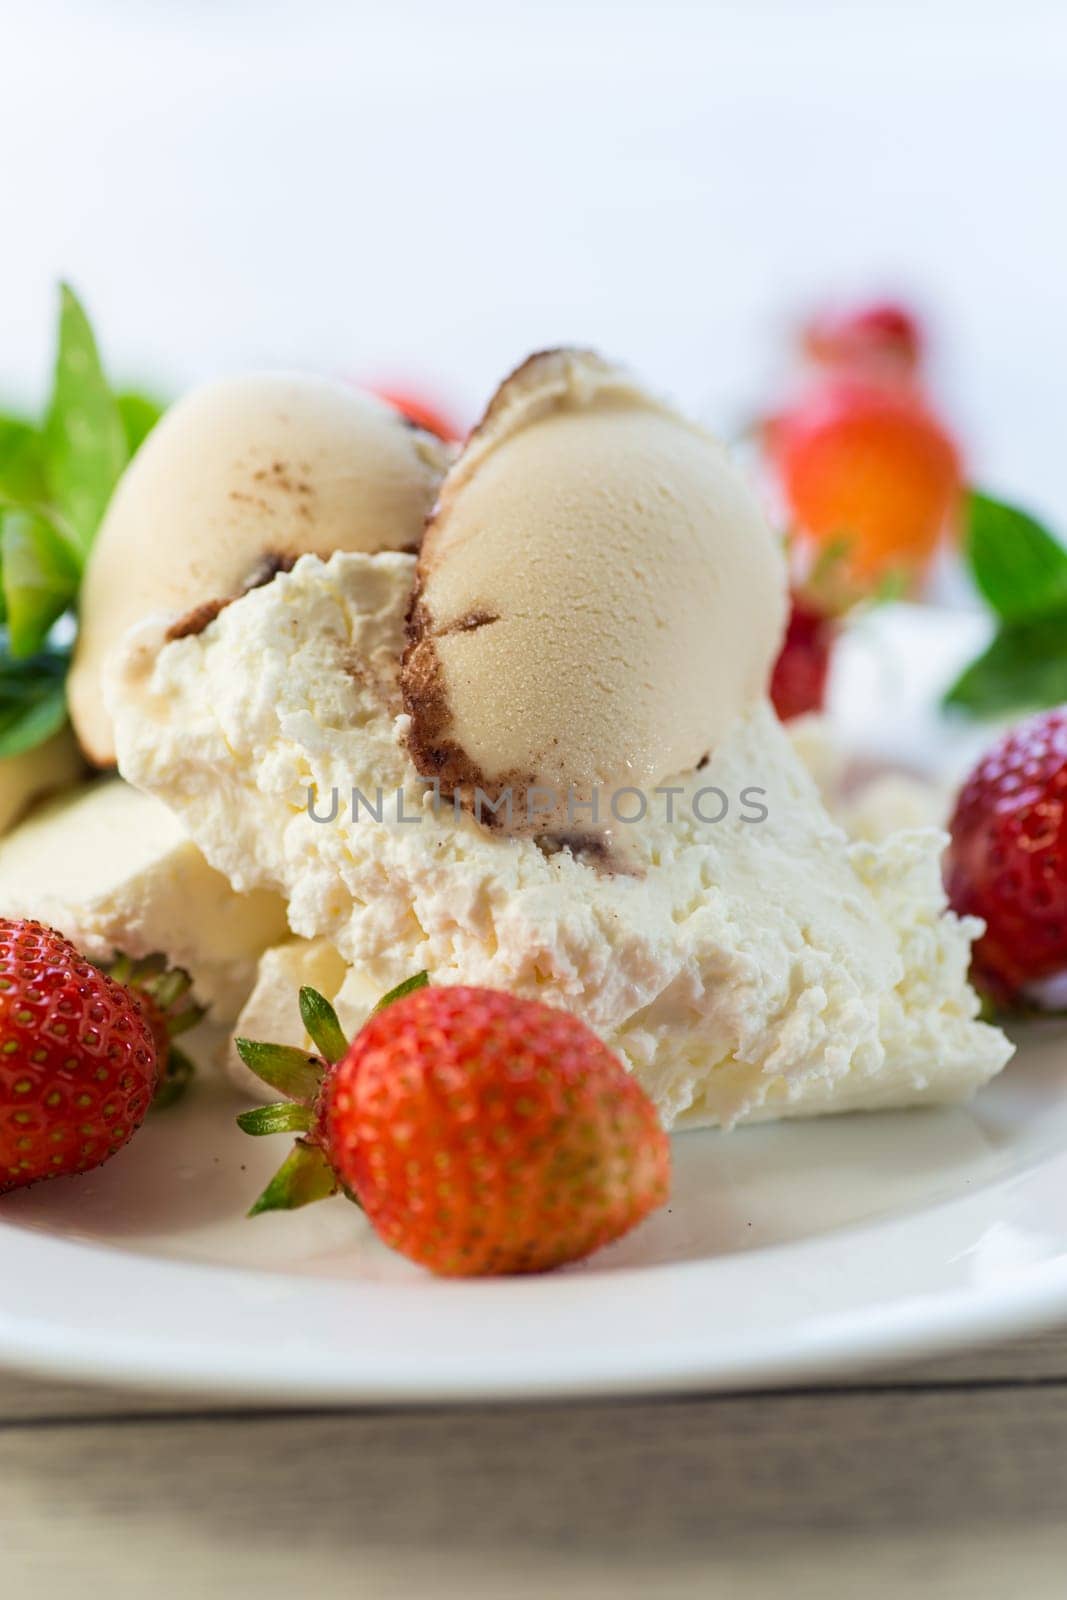 fresh organic cottage cheese with strawberries and ice cream in a plate on a wooden table .